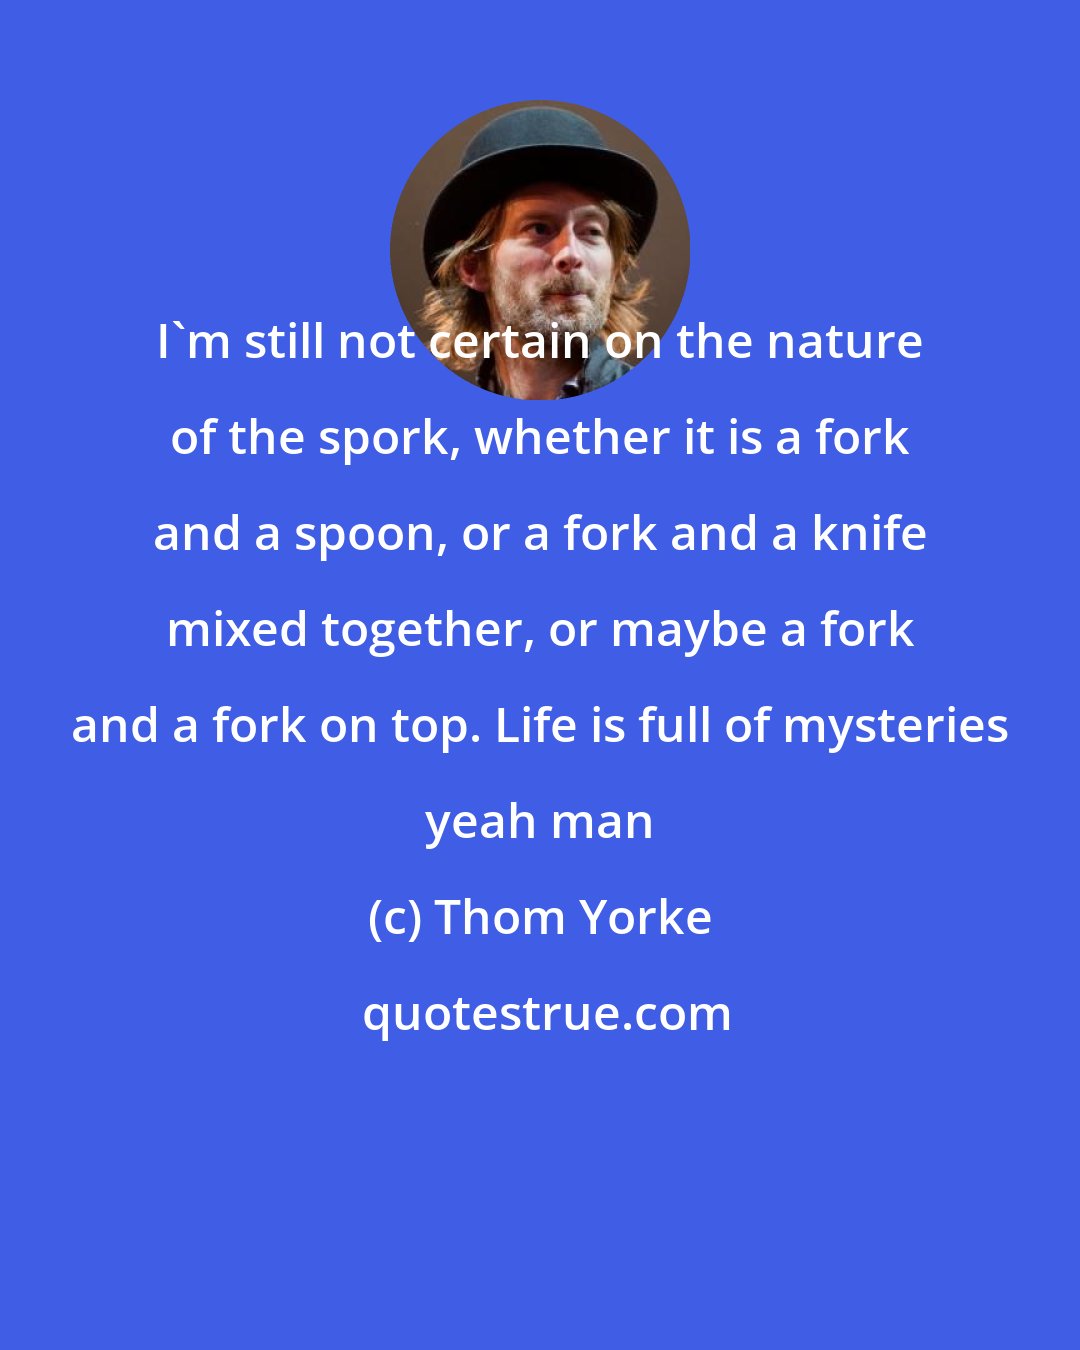 Thom Yorke: I'm still not certain on the nature of the spork, whether it is a fork and a spoon, or a fork and a knife mixed together, or maybe a fork and a fork on top. Life is full of mysteries yeah man